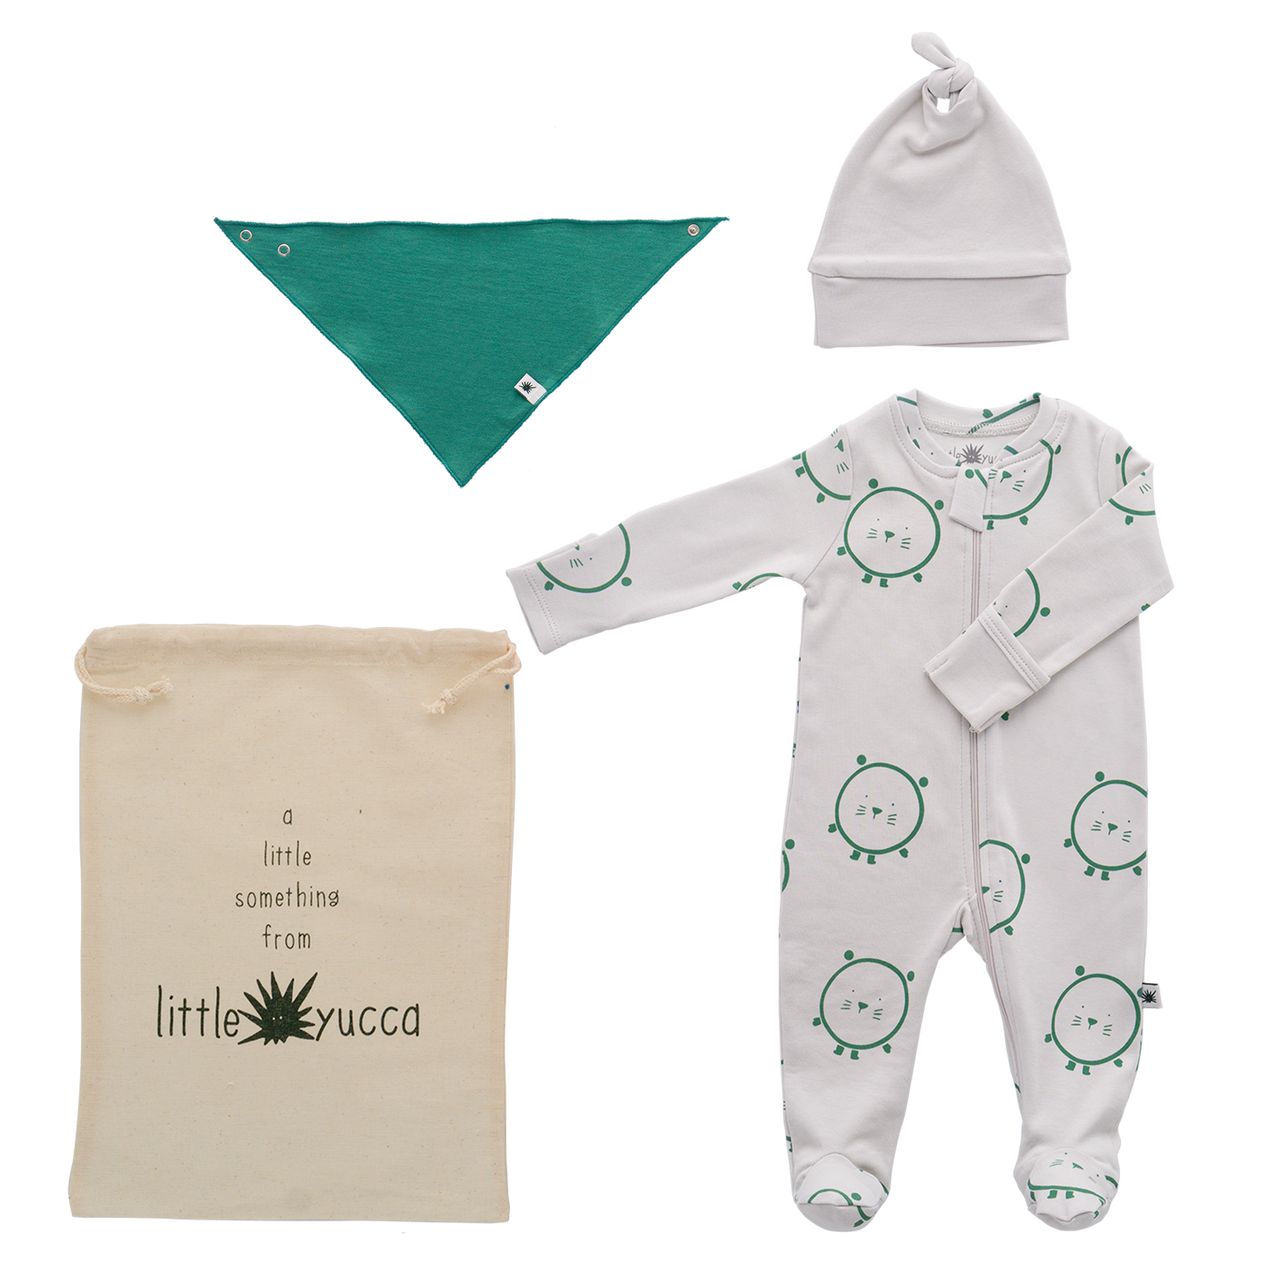 "Welcome" Baby Set Mini - Offwhite & Green